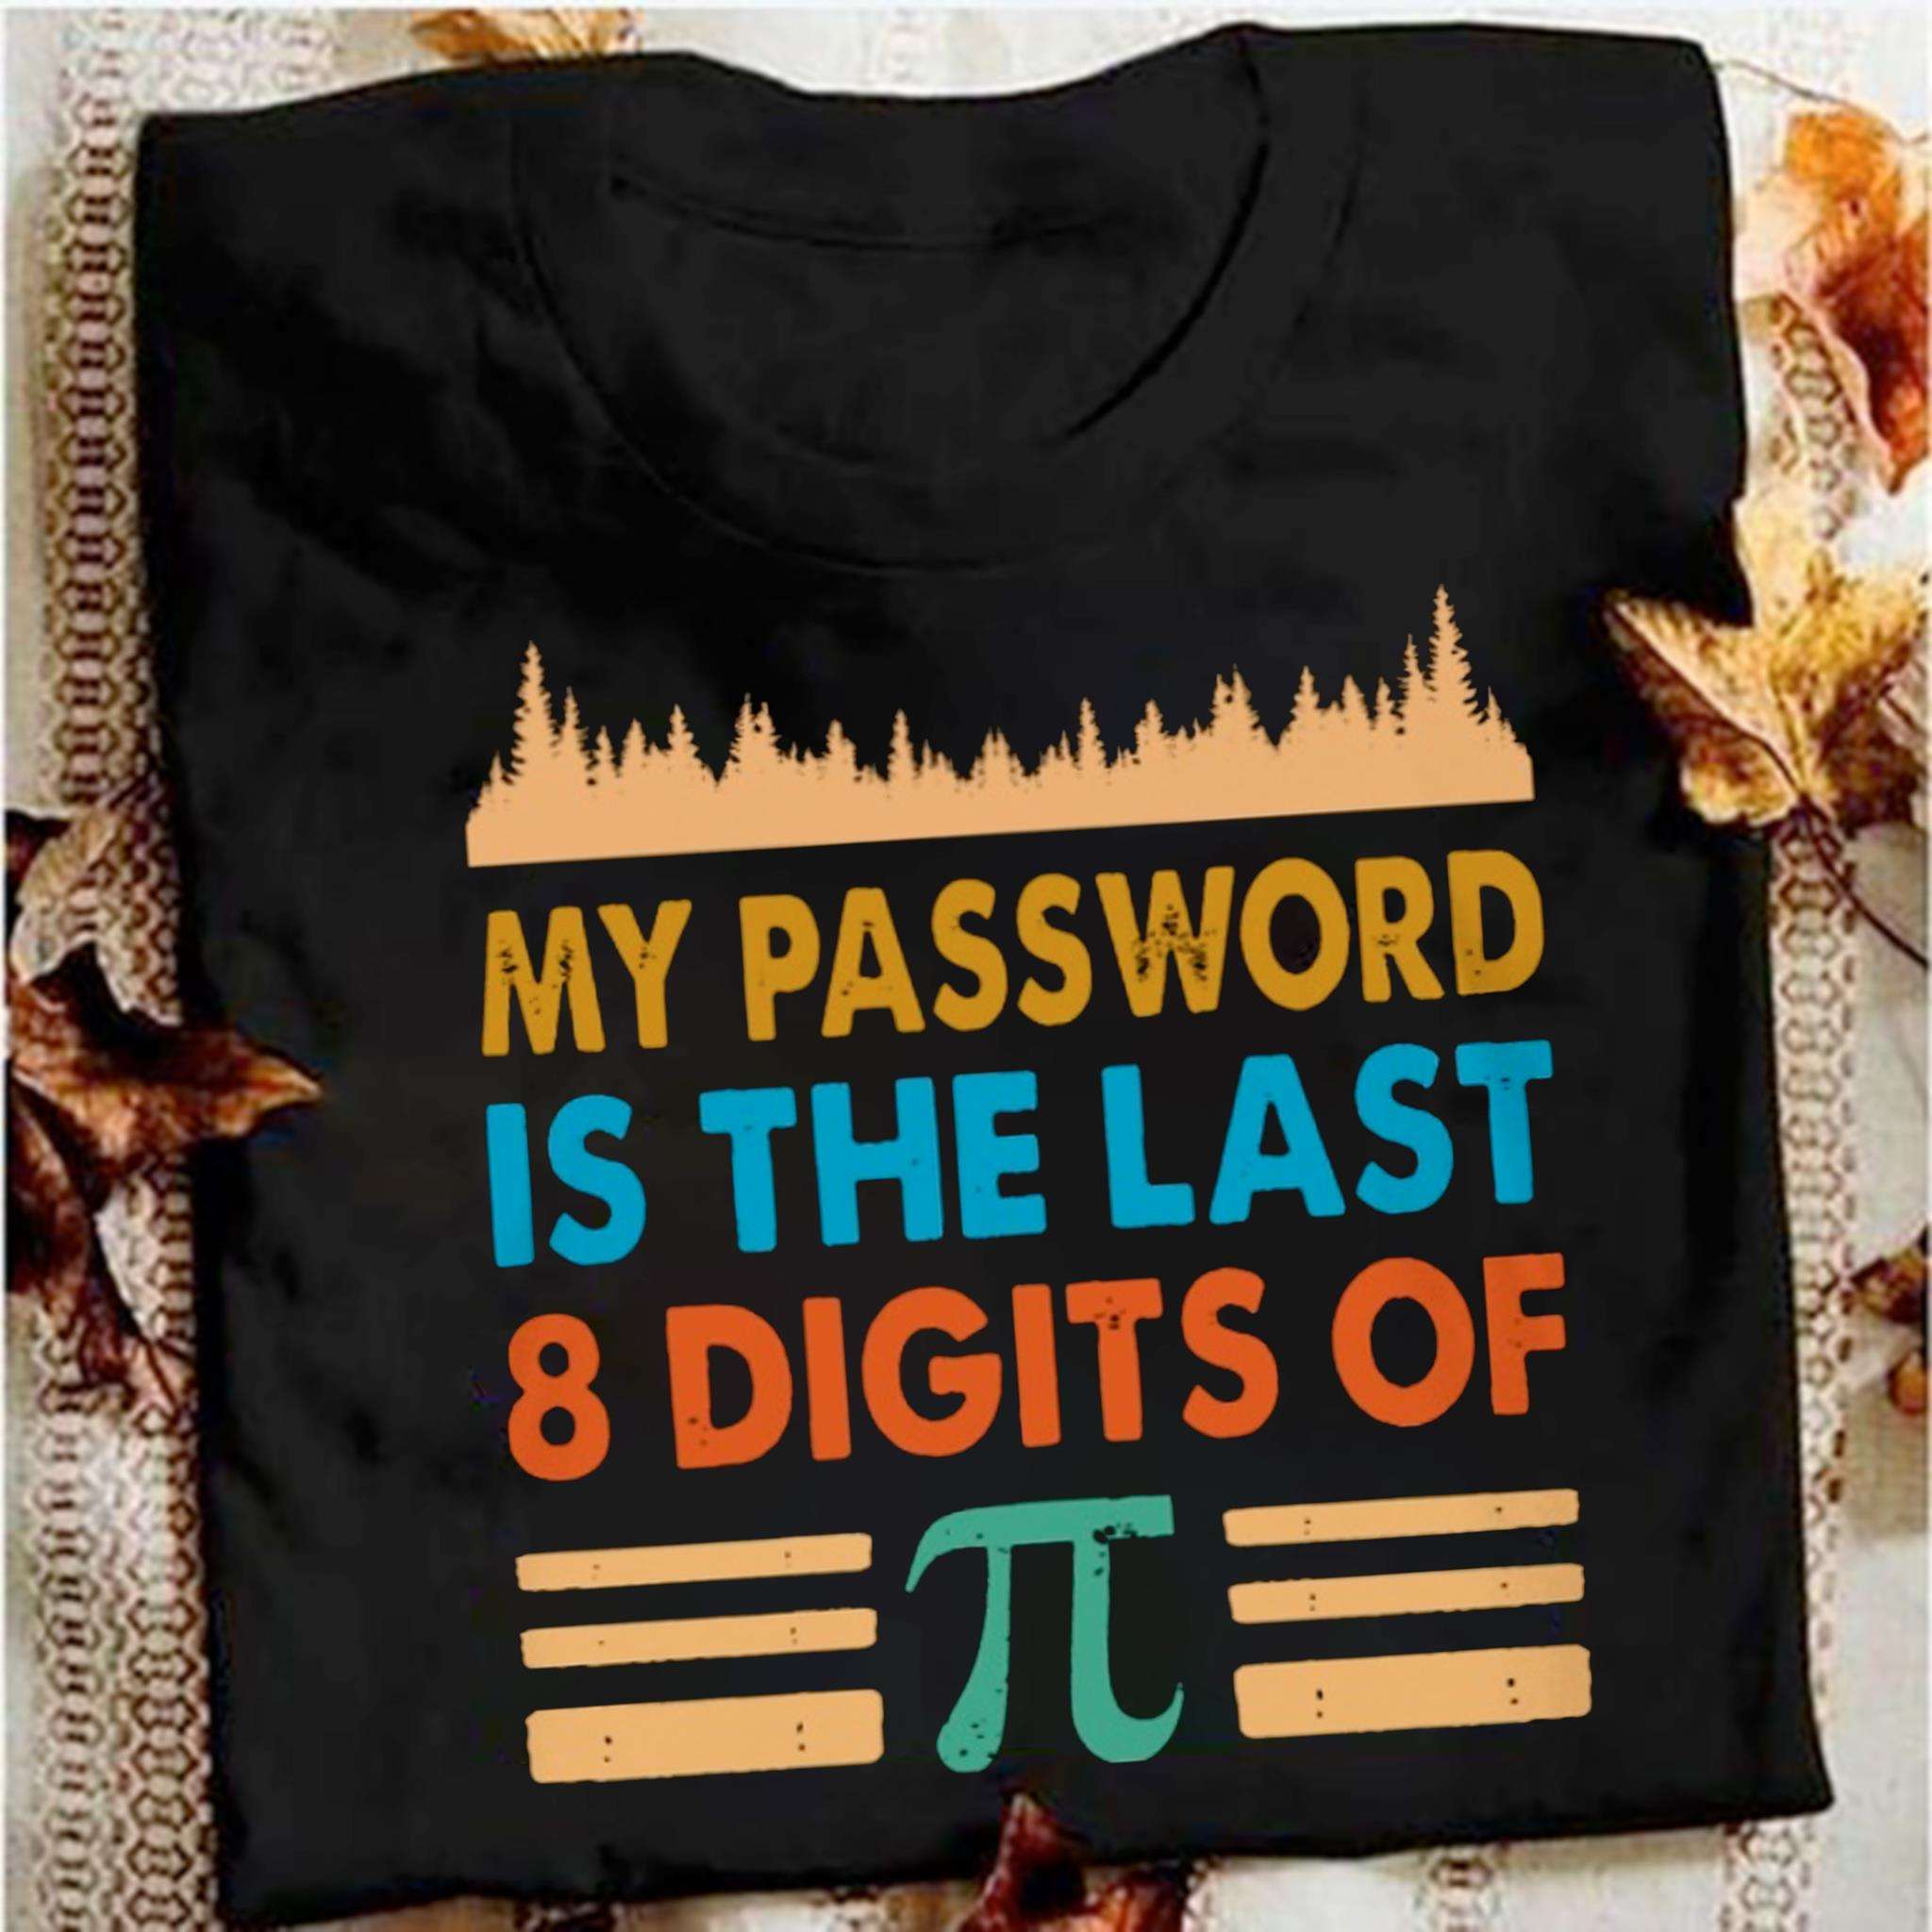 My password is the last 8 digits of pi - Pi in math Math knowledge